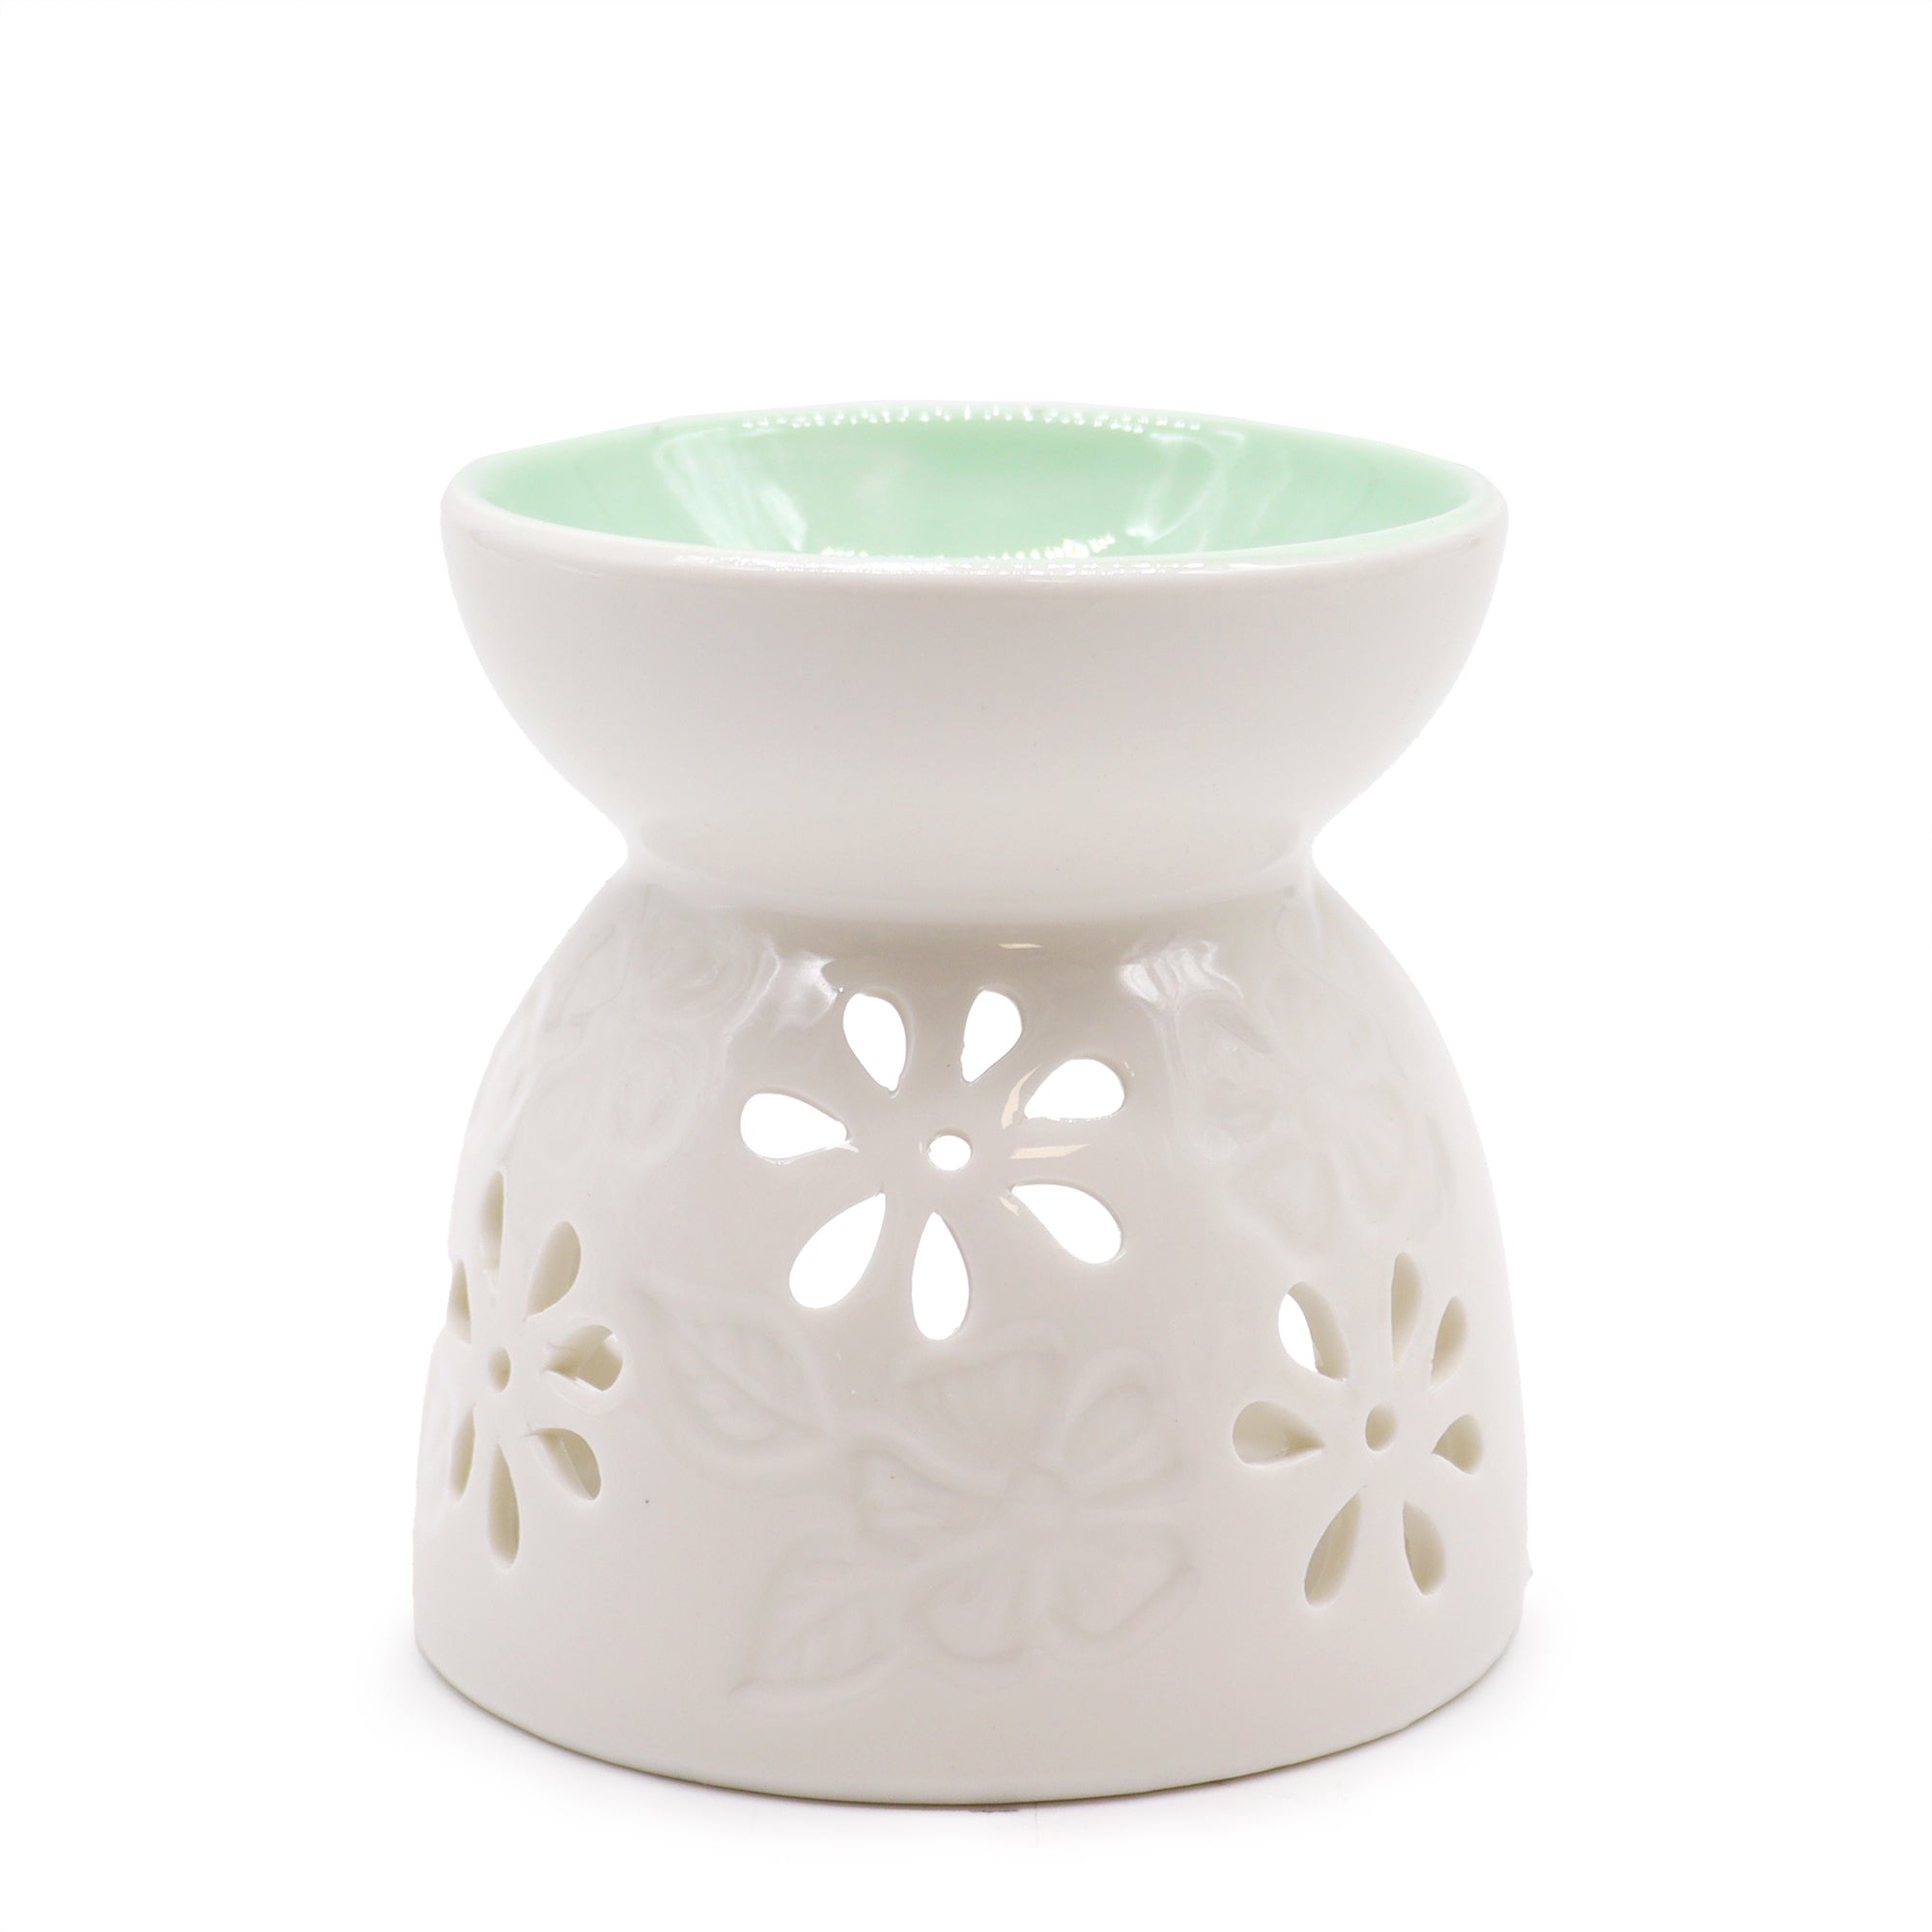 View Classic White Oil Burner Floral with Teal Well information